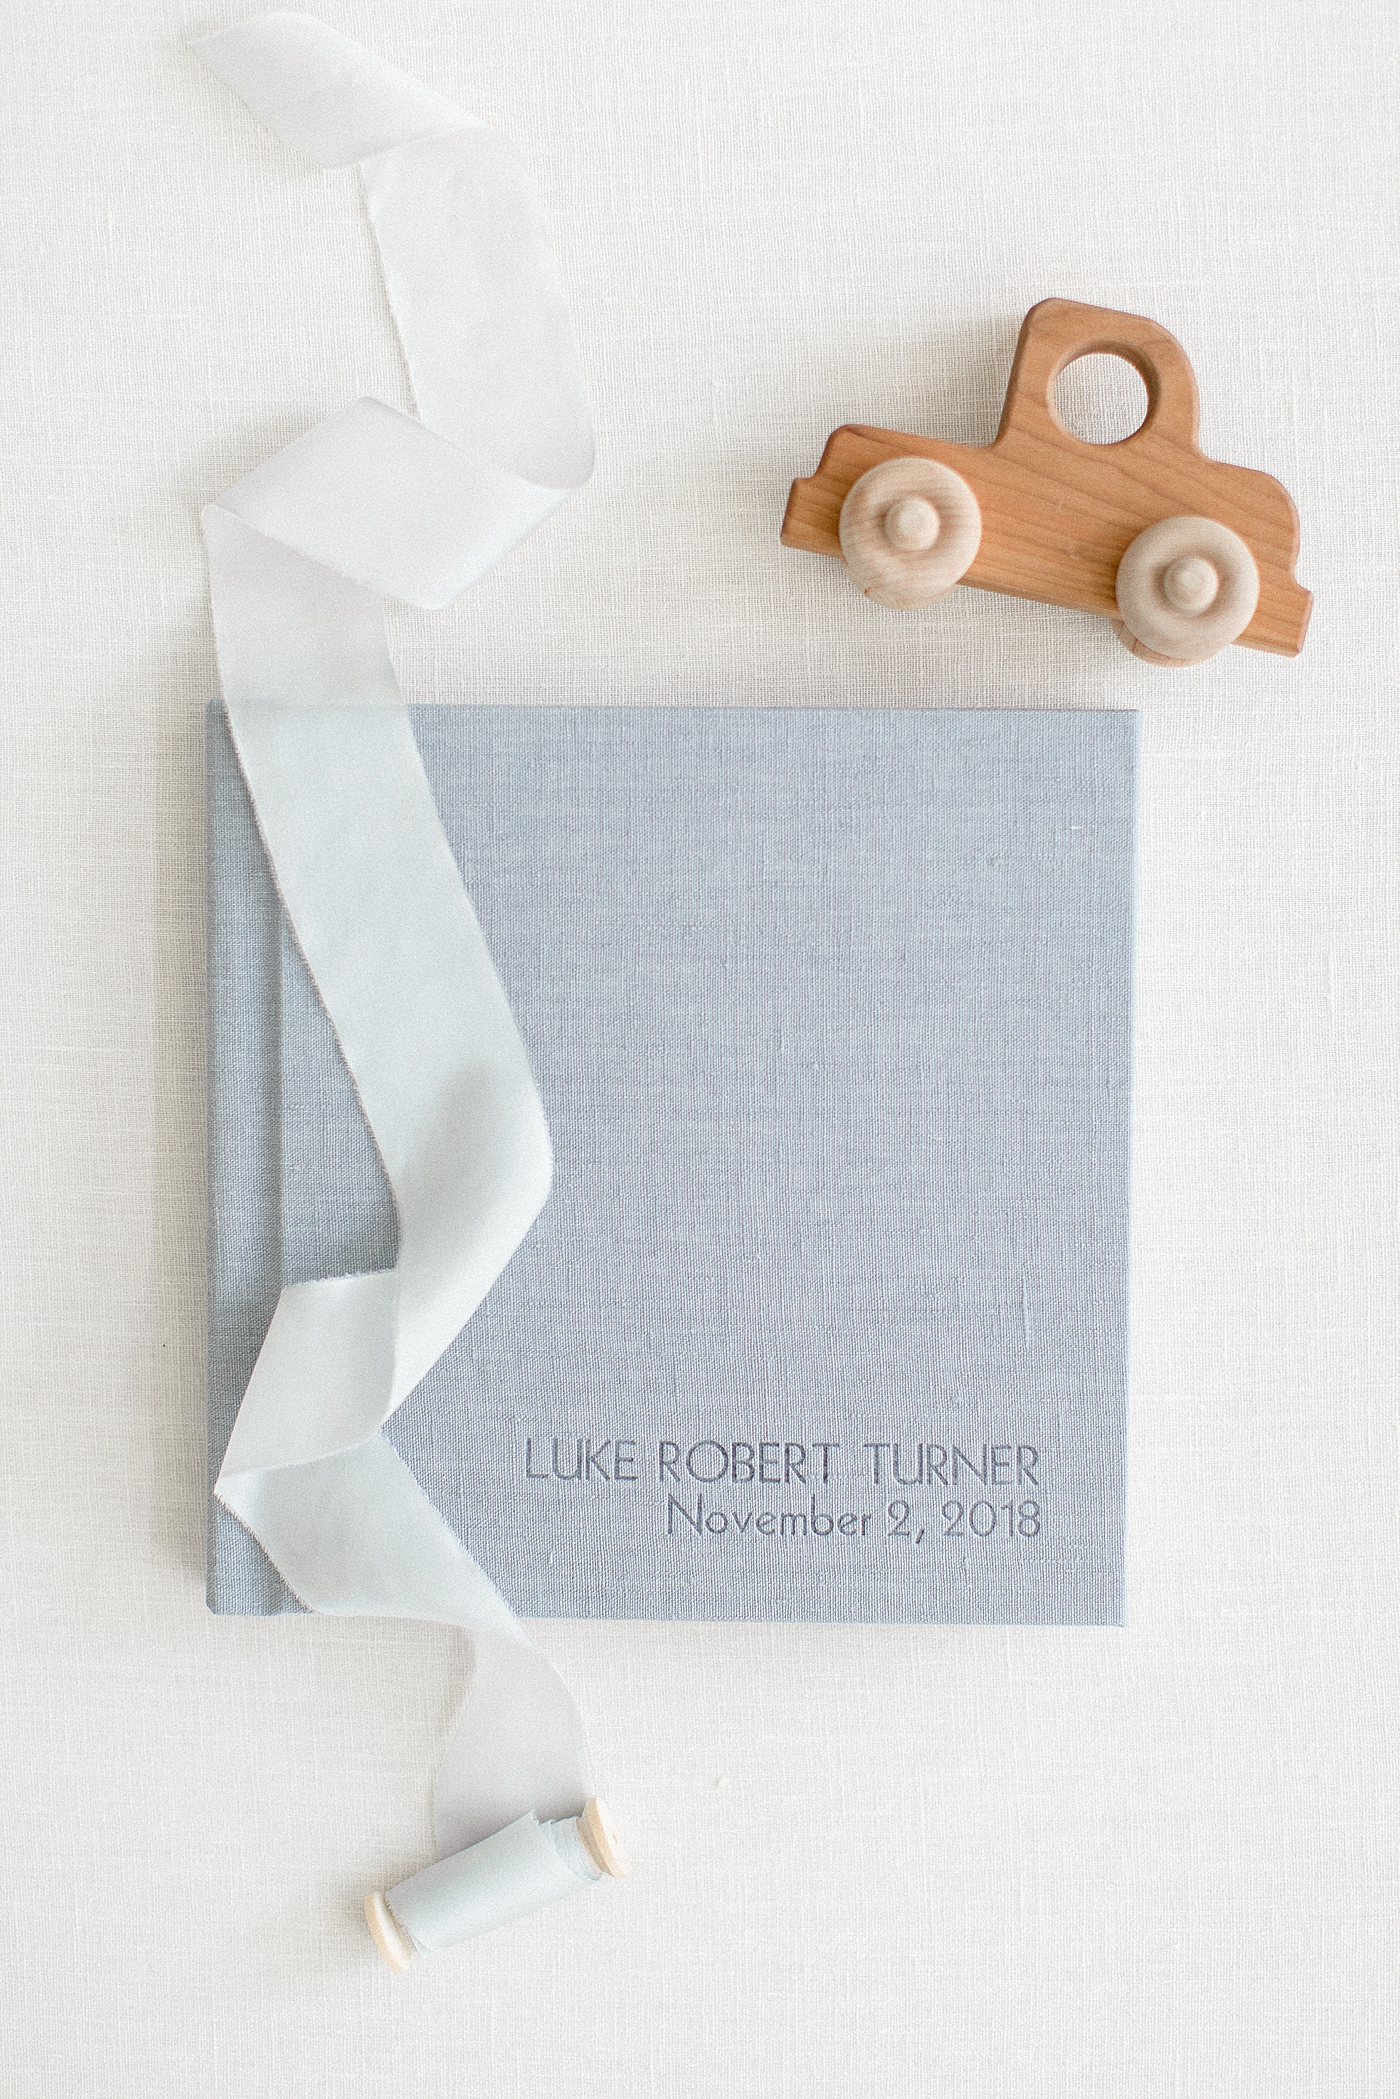 Gray album with ribbon and wooden toy | Sana Ahmed Photography